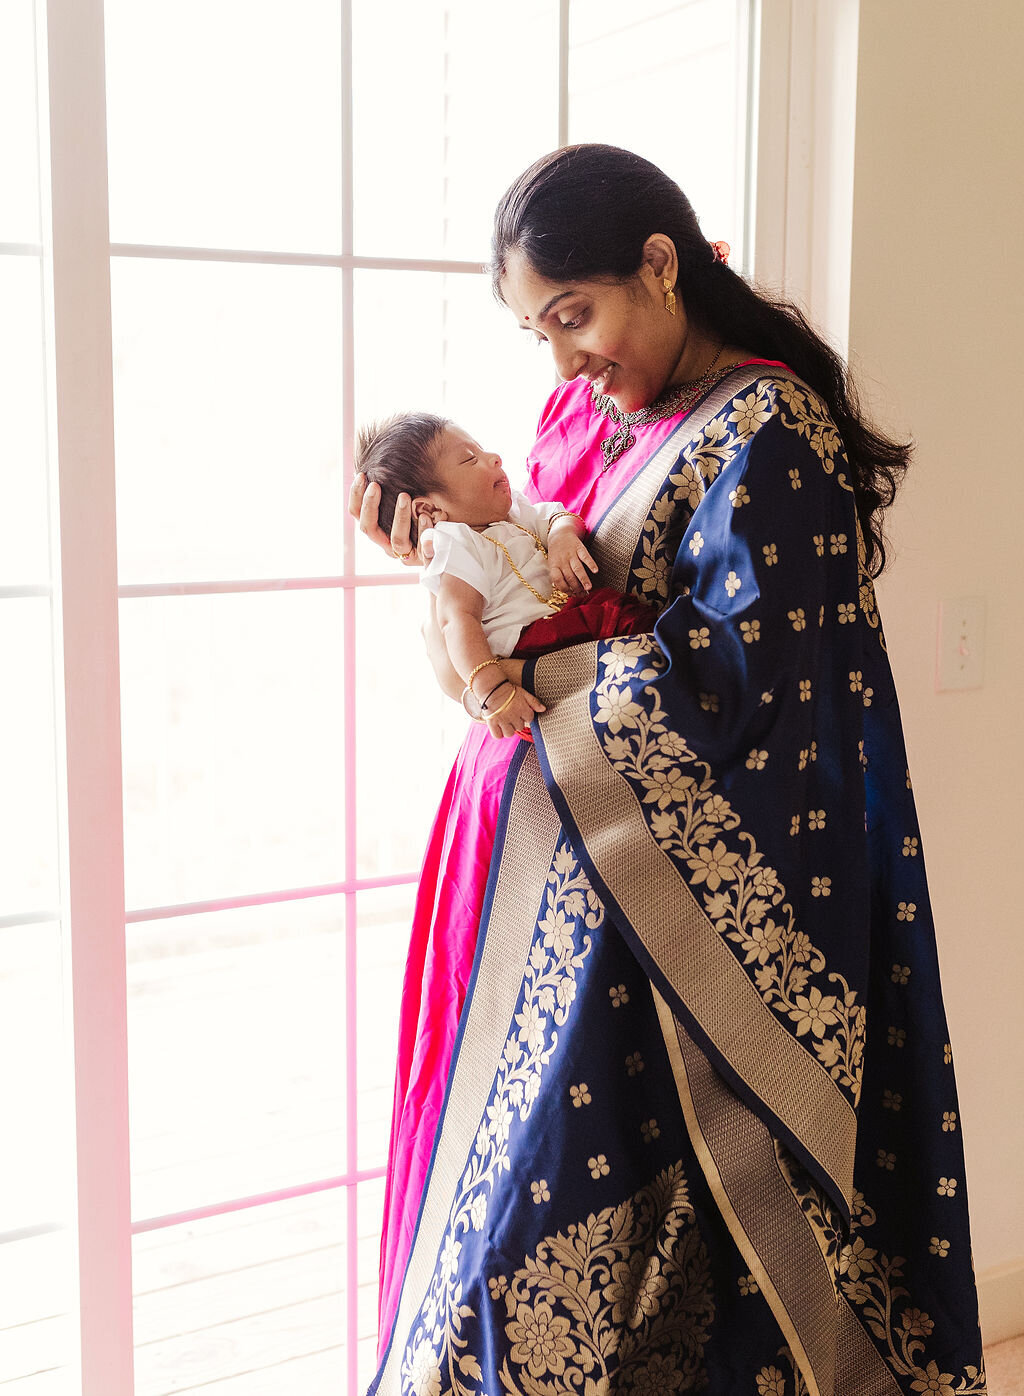 newborn baby with mom in indian clothing